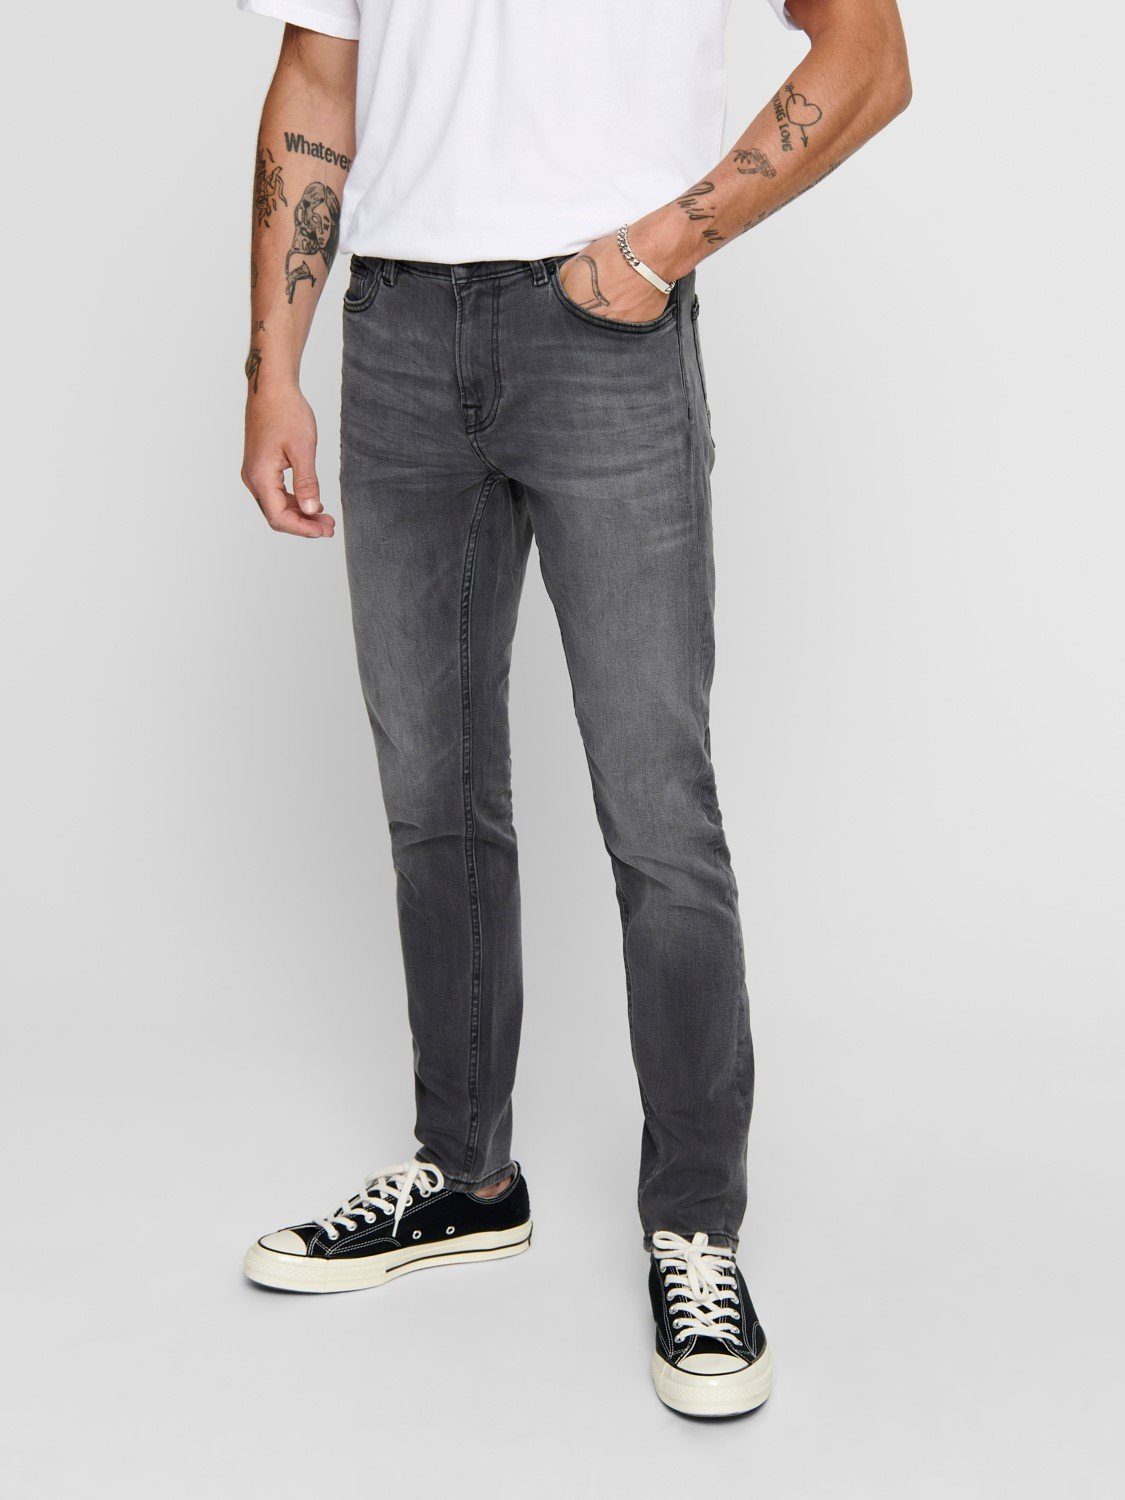 ONLY & 3977 Denim Slim-fit-Jeans SONS Pants Fit Hose Skinny (1-tlg) in Grau Washed ONSWARP Stoned Basic Jeans